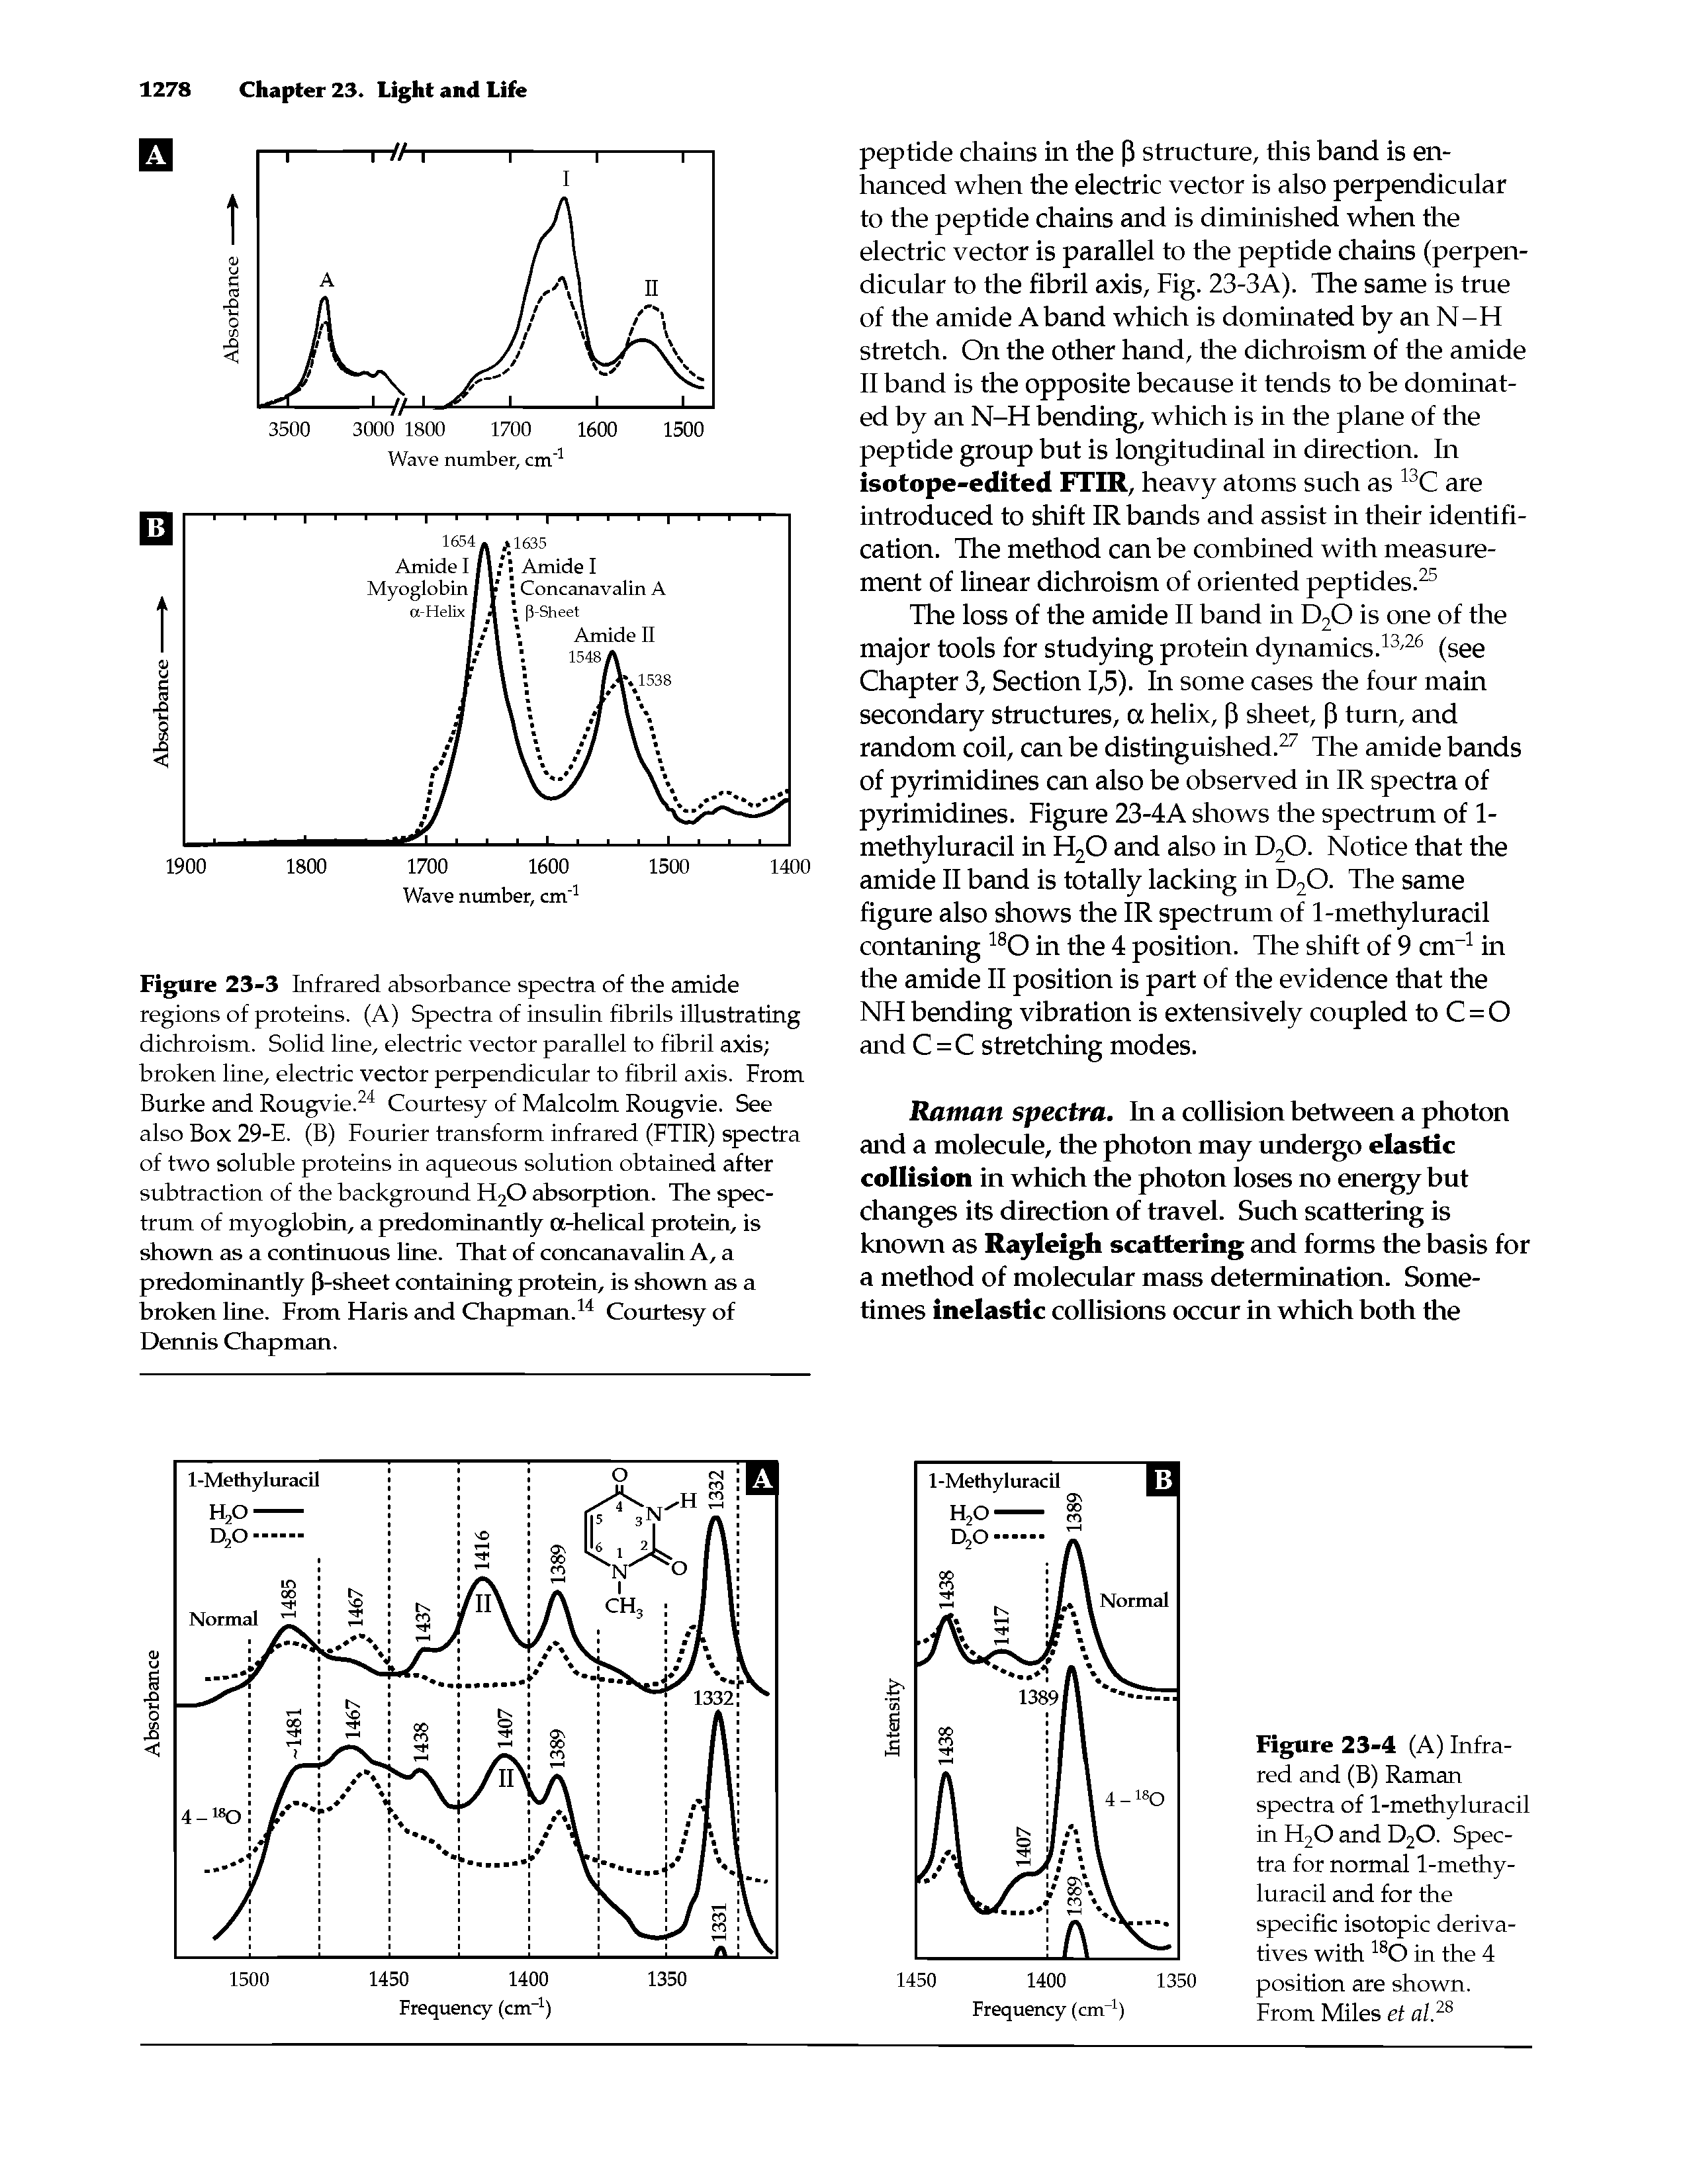 Figure 23-3 Infrared absorbance spectra of the amide regions of proteins. (A) Spectra of insulin fibrils illustrating dichroism. Solid line, electric vector parallel to fibril axis broken line, electric vector perpendicular to fibril axis. From Burke and Rougvie.24 Courtesy of Malcolm Rougvie. See also Box 29-E. (B) Fourier transform infrared (FTIR) spectra of two soluble proteins in aqueous solution obtained after subtraction of the background H20 absorption. The spectrum of myoglobin, a predominantly a-helical protein, is shown as a continuous line. That of concanavalin A, a predominantly (3-sheet containing protein, is shown as a broken line. From Haris and Chapman.14 Courtesy of Dennis Chapman.